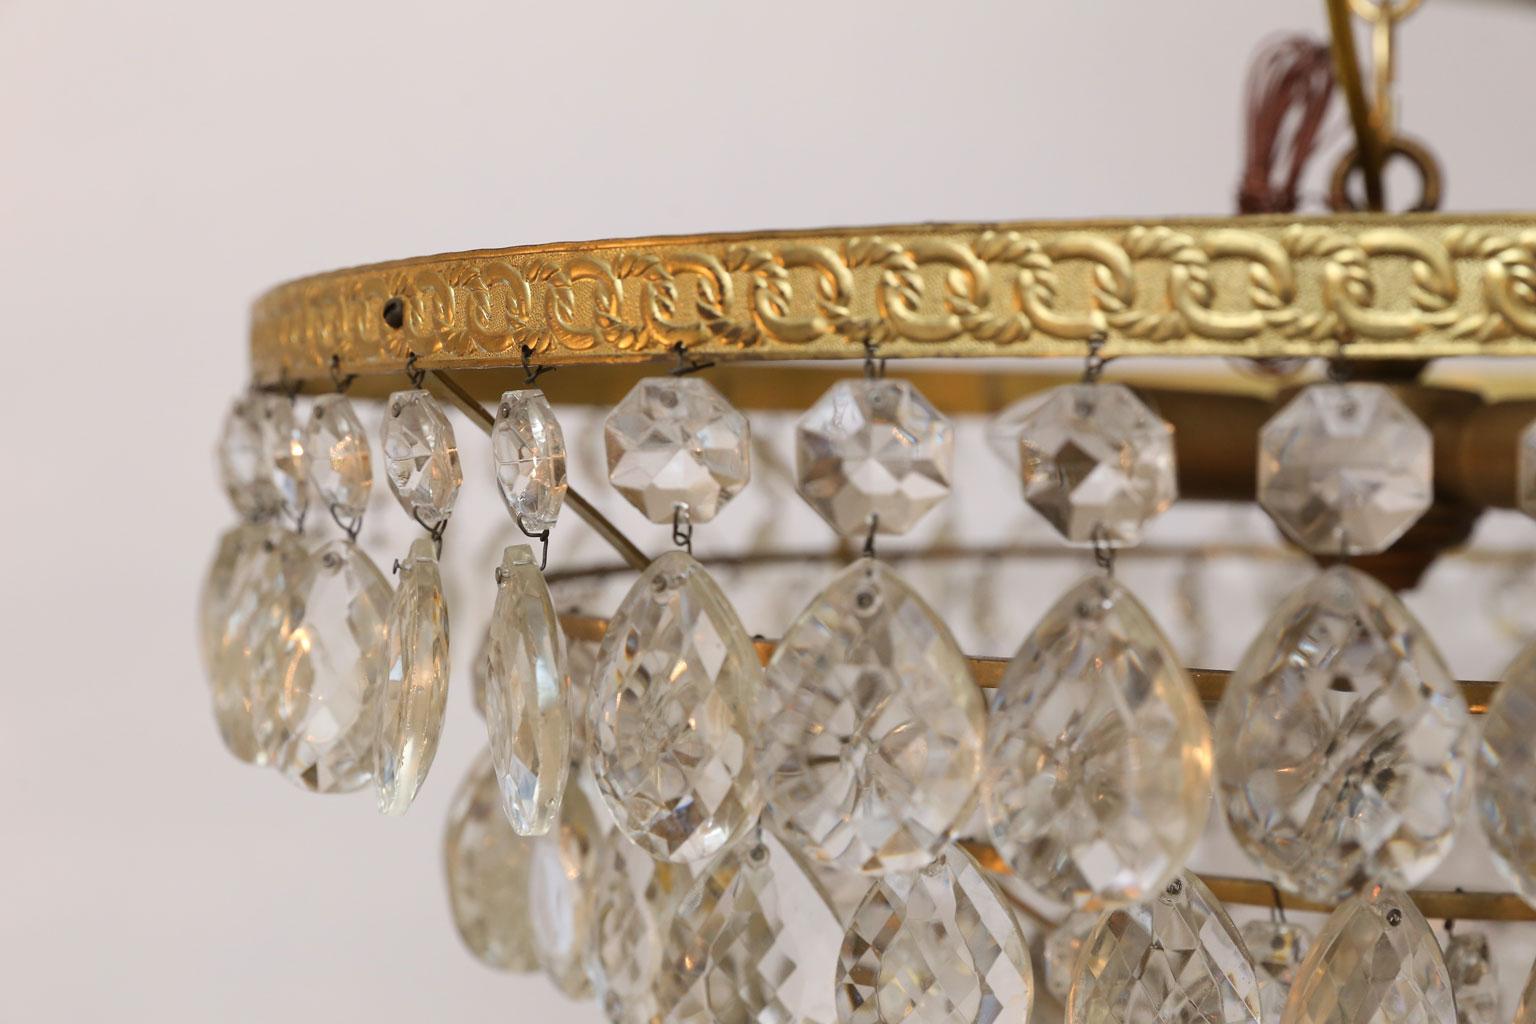 Cast Gilt Brass and Crystal Mid century Modern Chandelier by Palwa with 4 Tiers